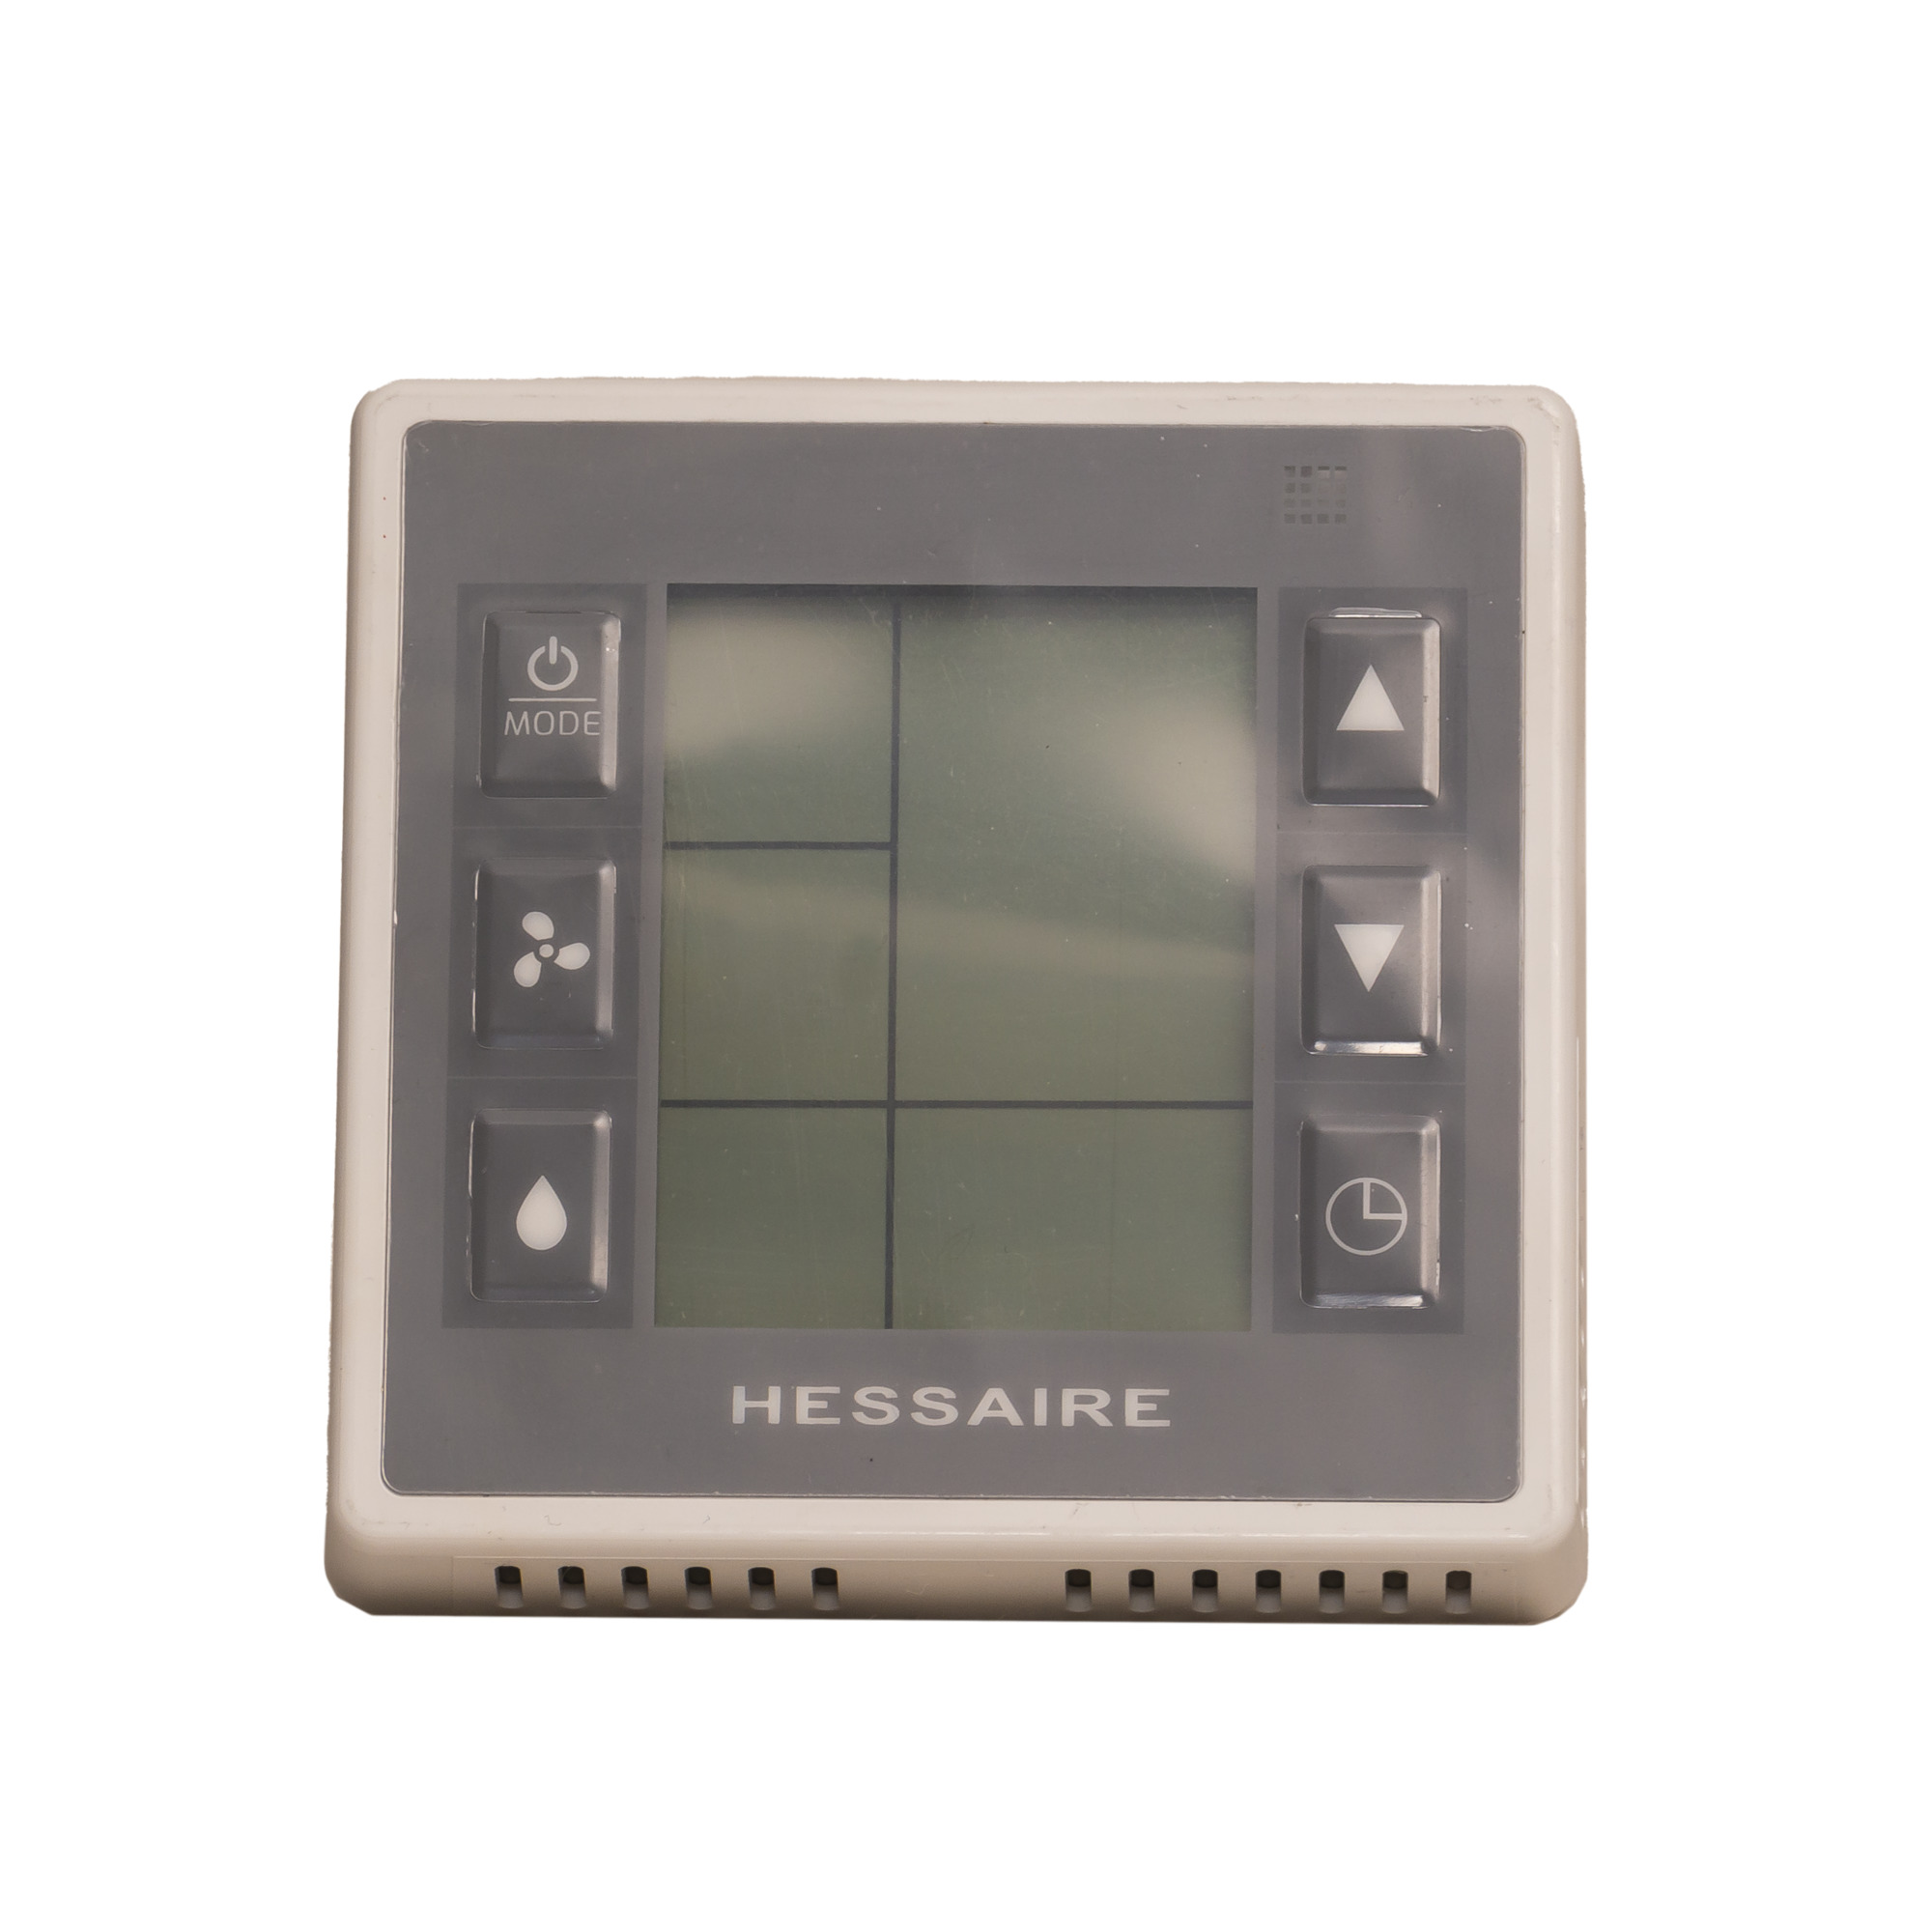 Hessaire, Evap Cooler Thermostat, Model HTH01-Wifi